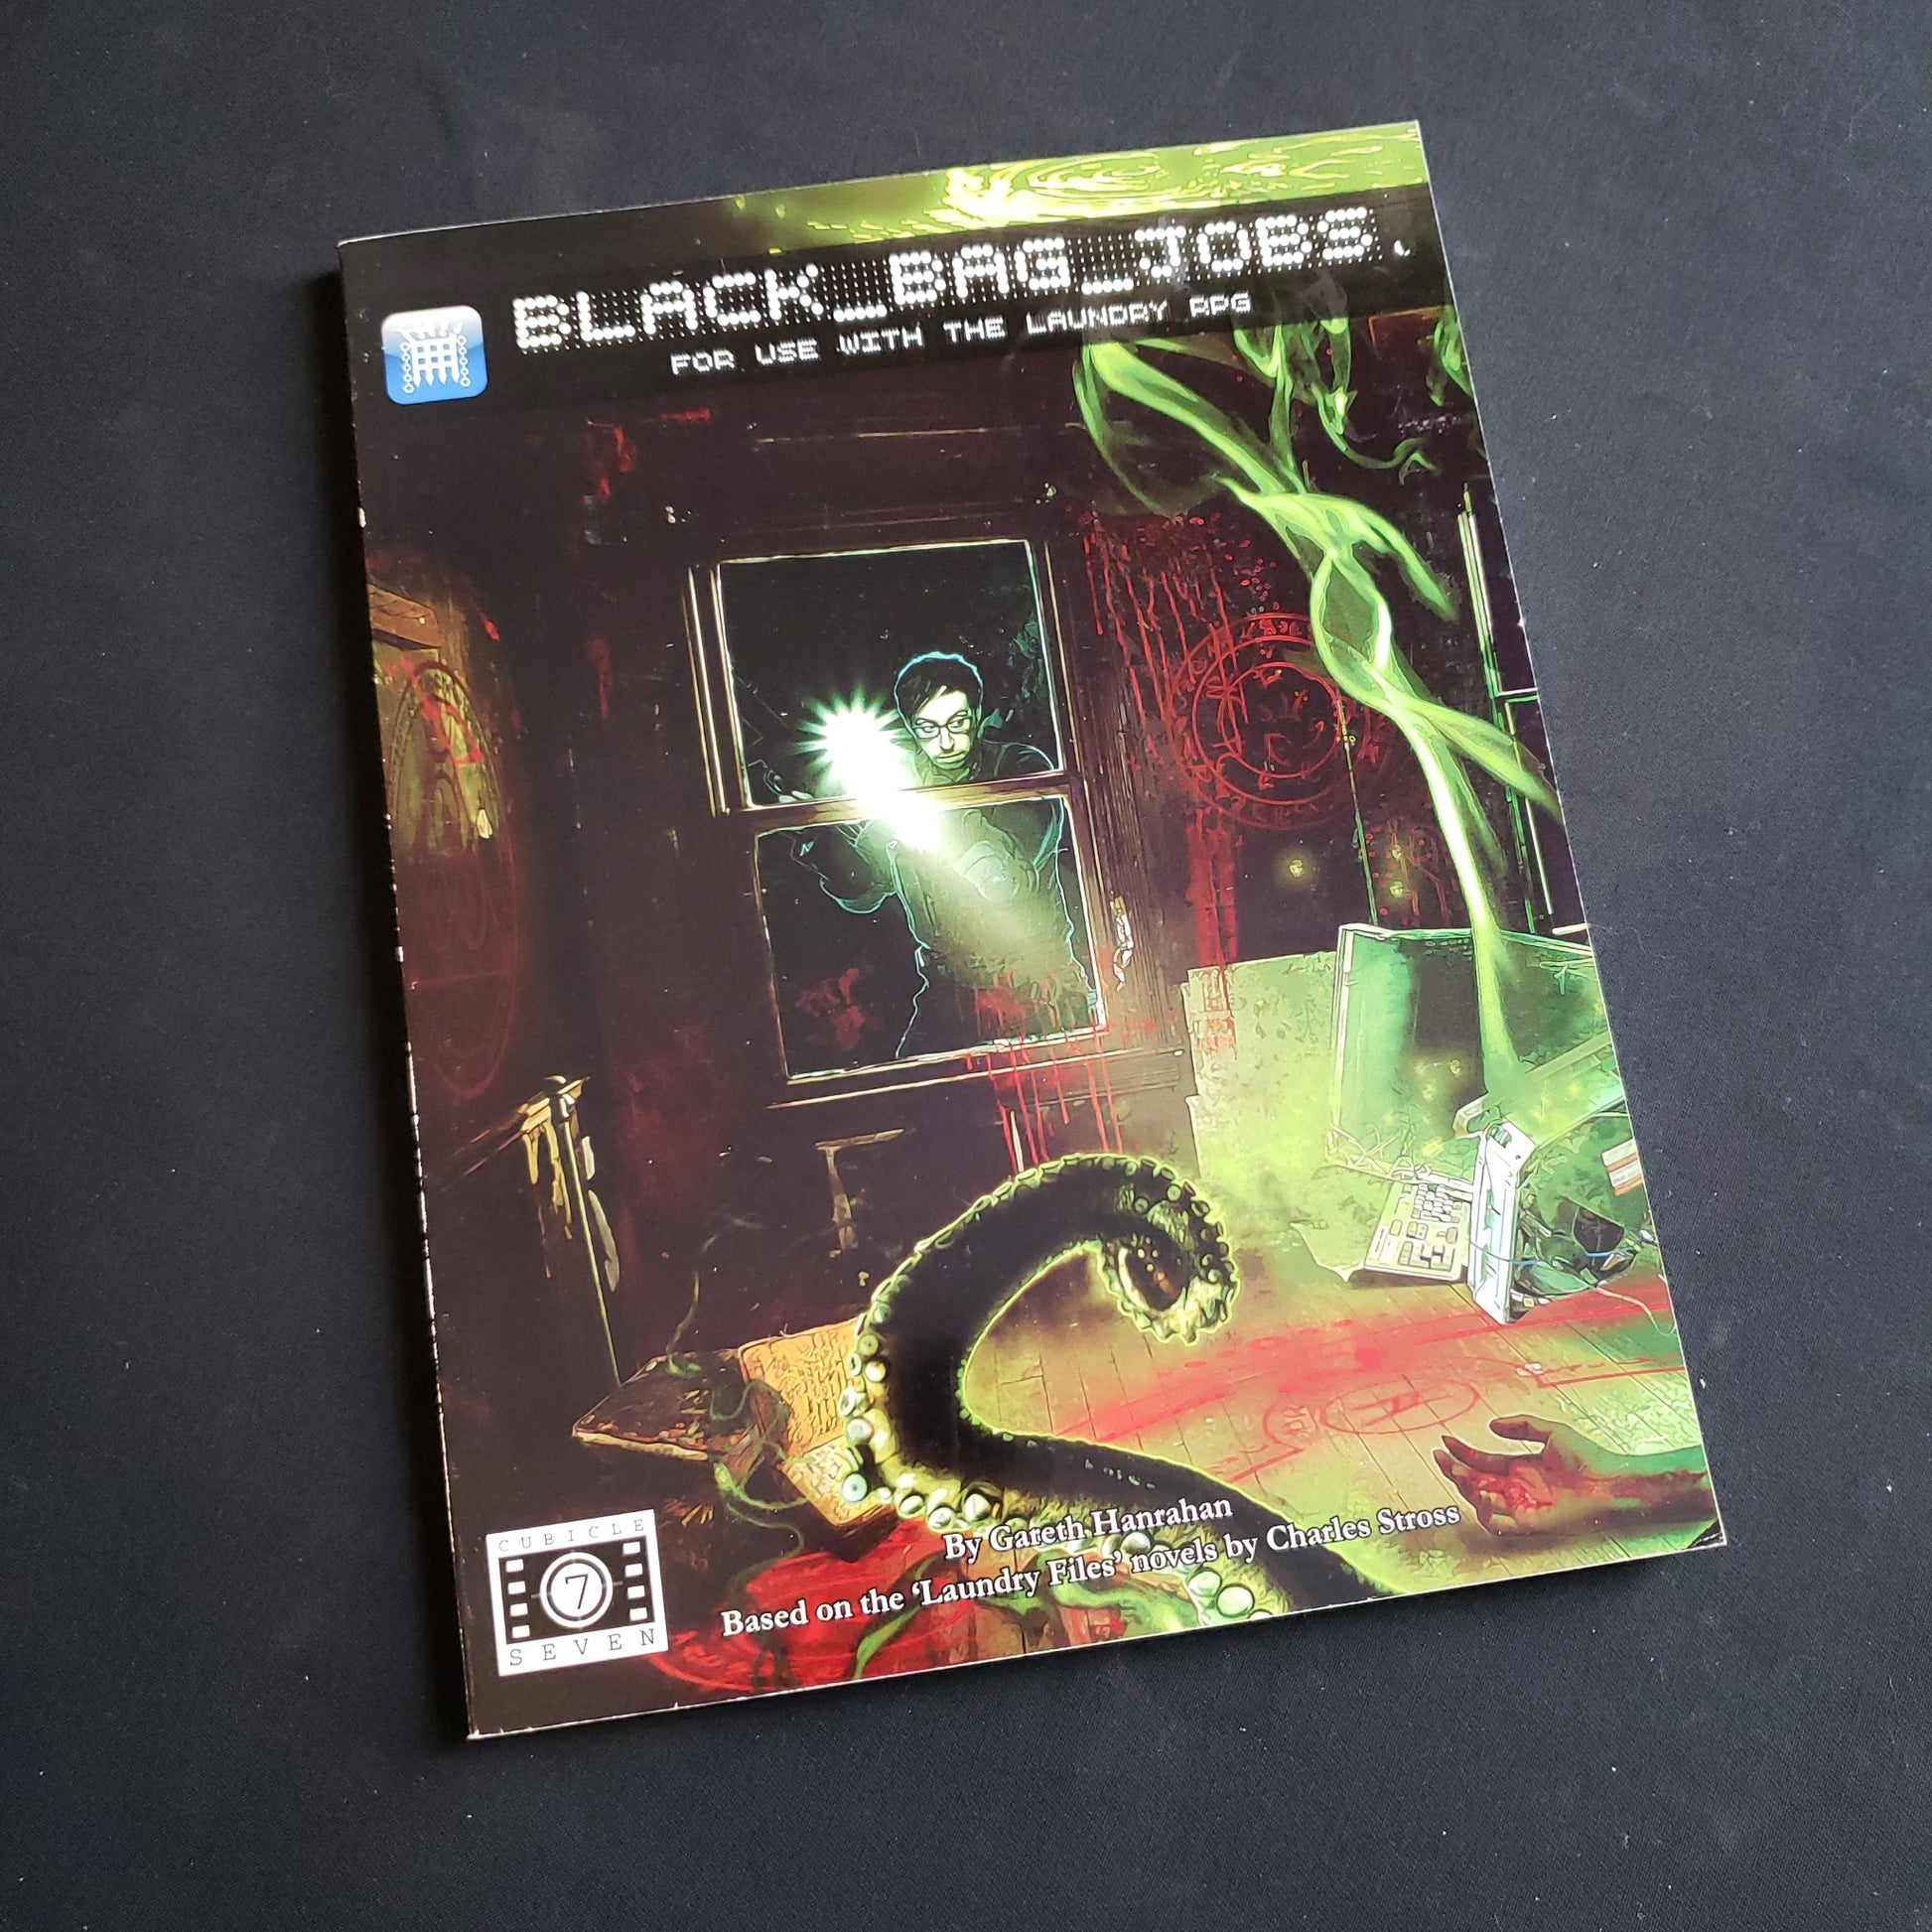 Image shows the front cover of the Black Bag Jobs book for the Laundry roleplaying game